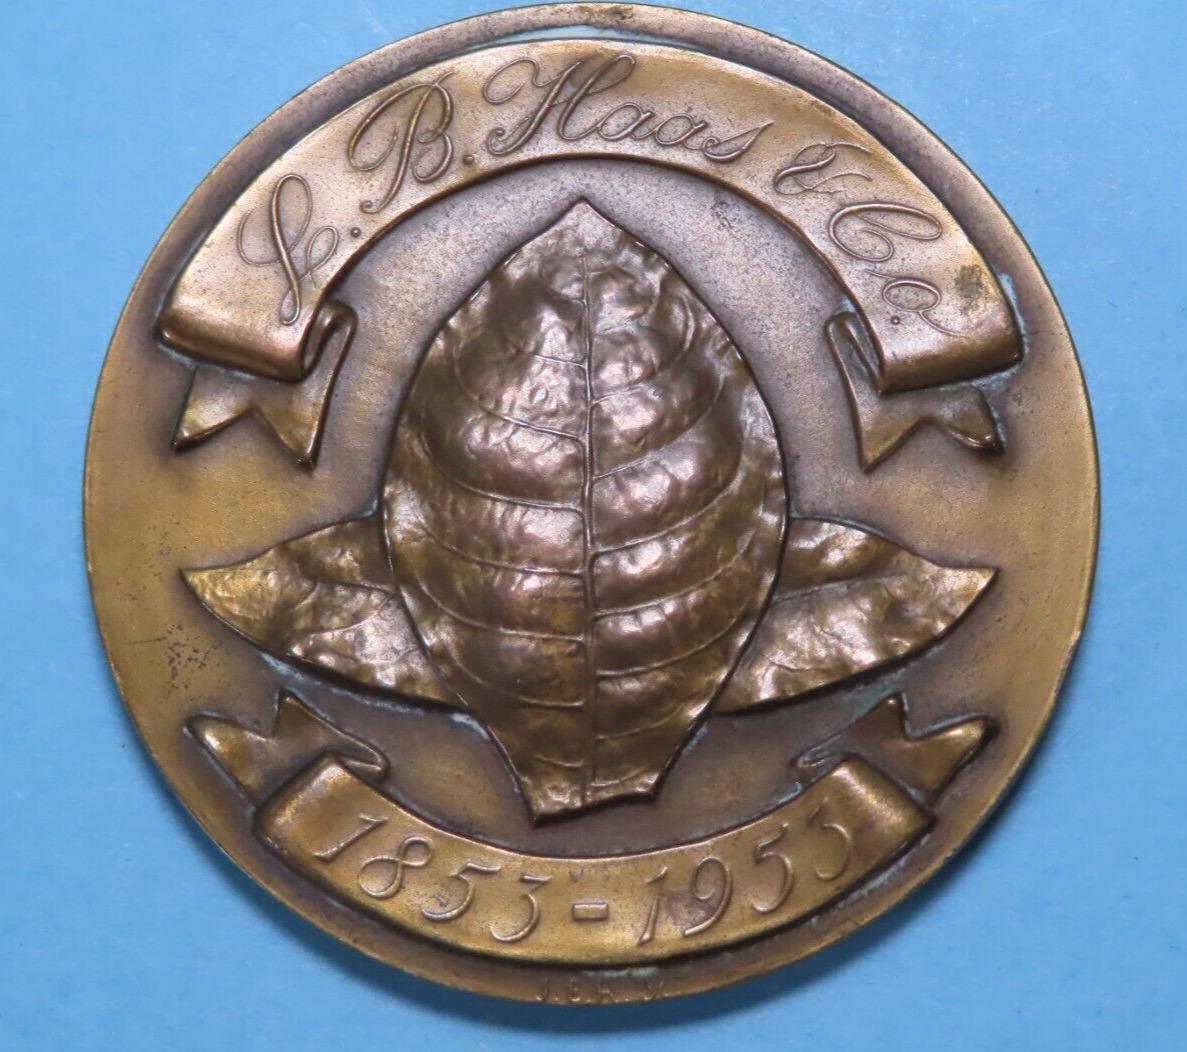 Vtg 1953 L B HAAS TOBACCO CO. Bronze Paperweight Medallion ~ Medallic Art Co. NY